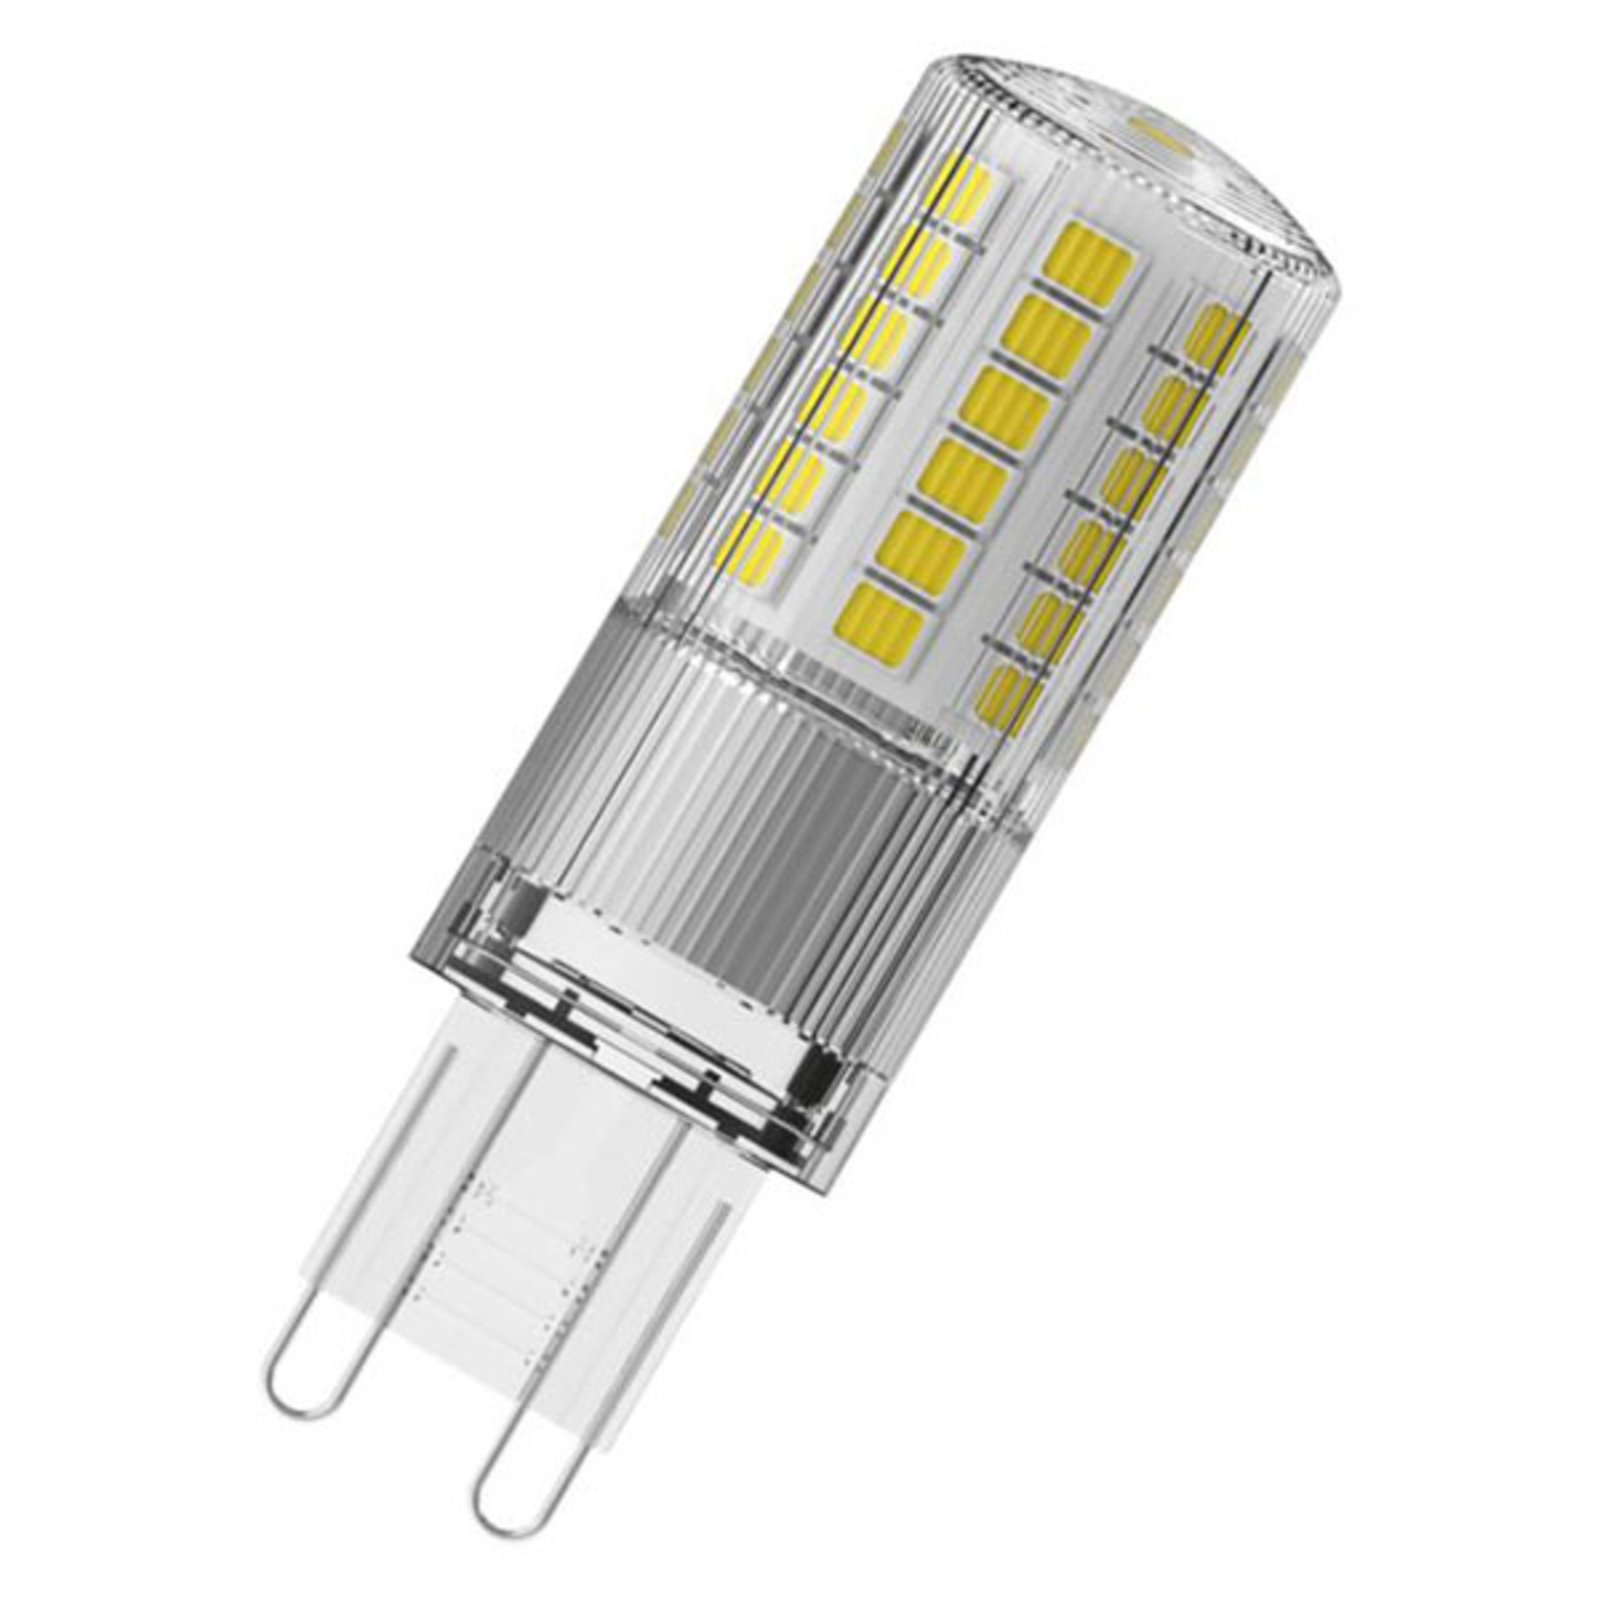 OSRAM LED bulb G9 4W 2,700K clear 3-step dimmable